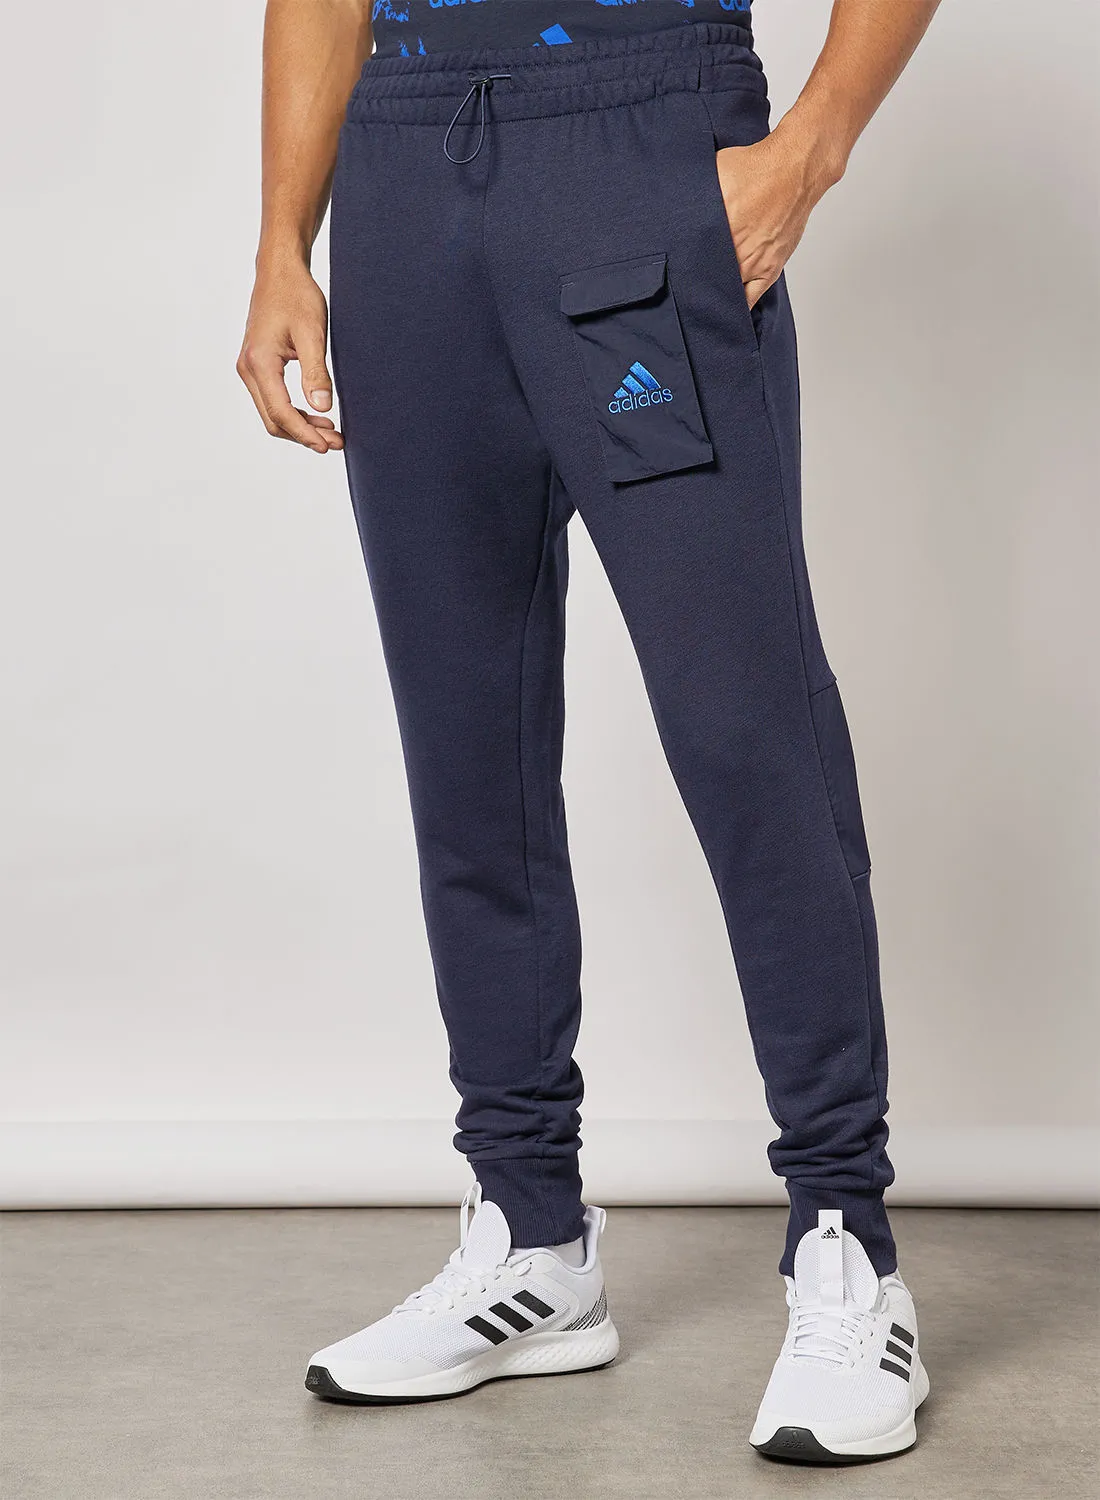 adidas Essentials French Terry Sweatpants